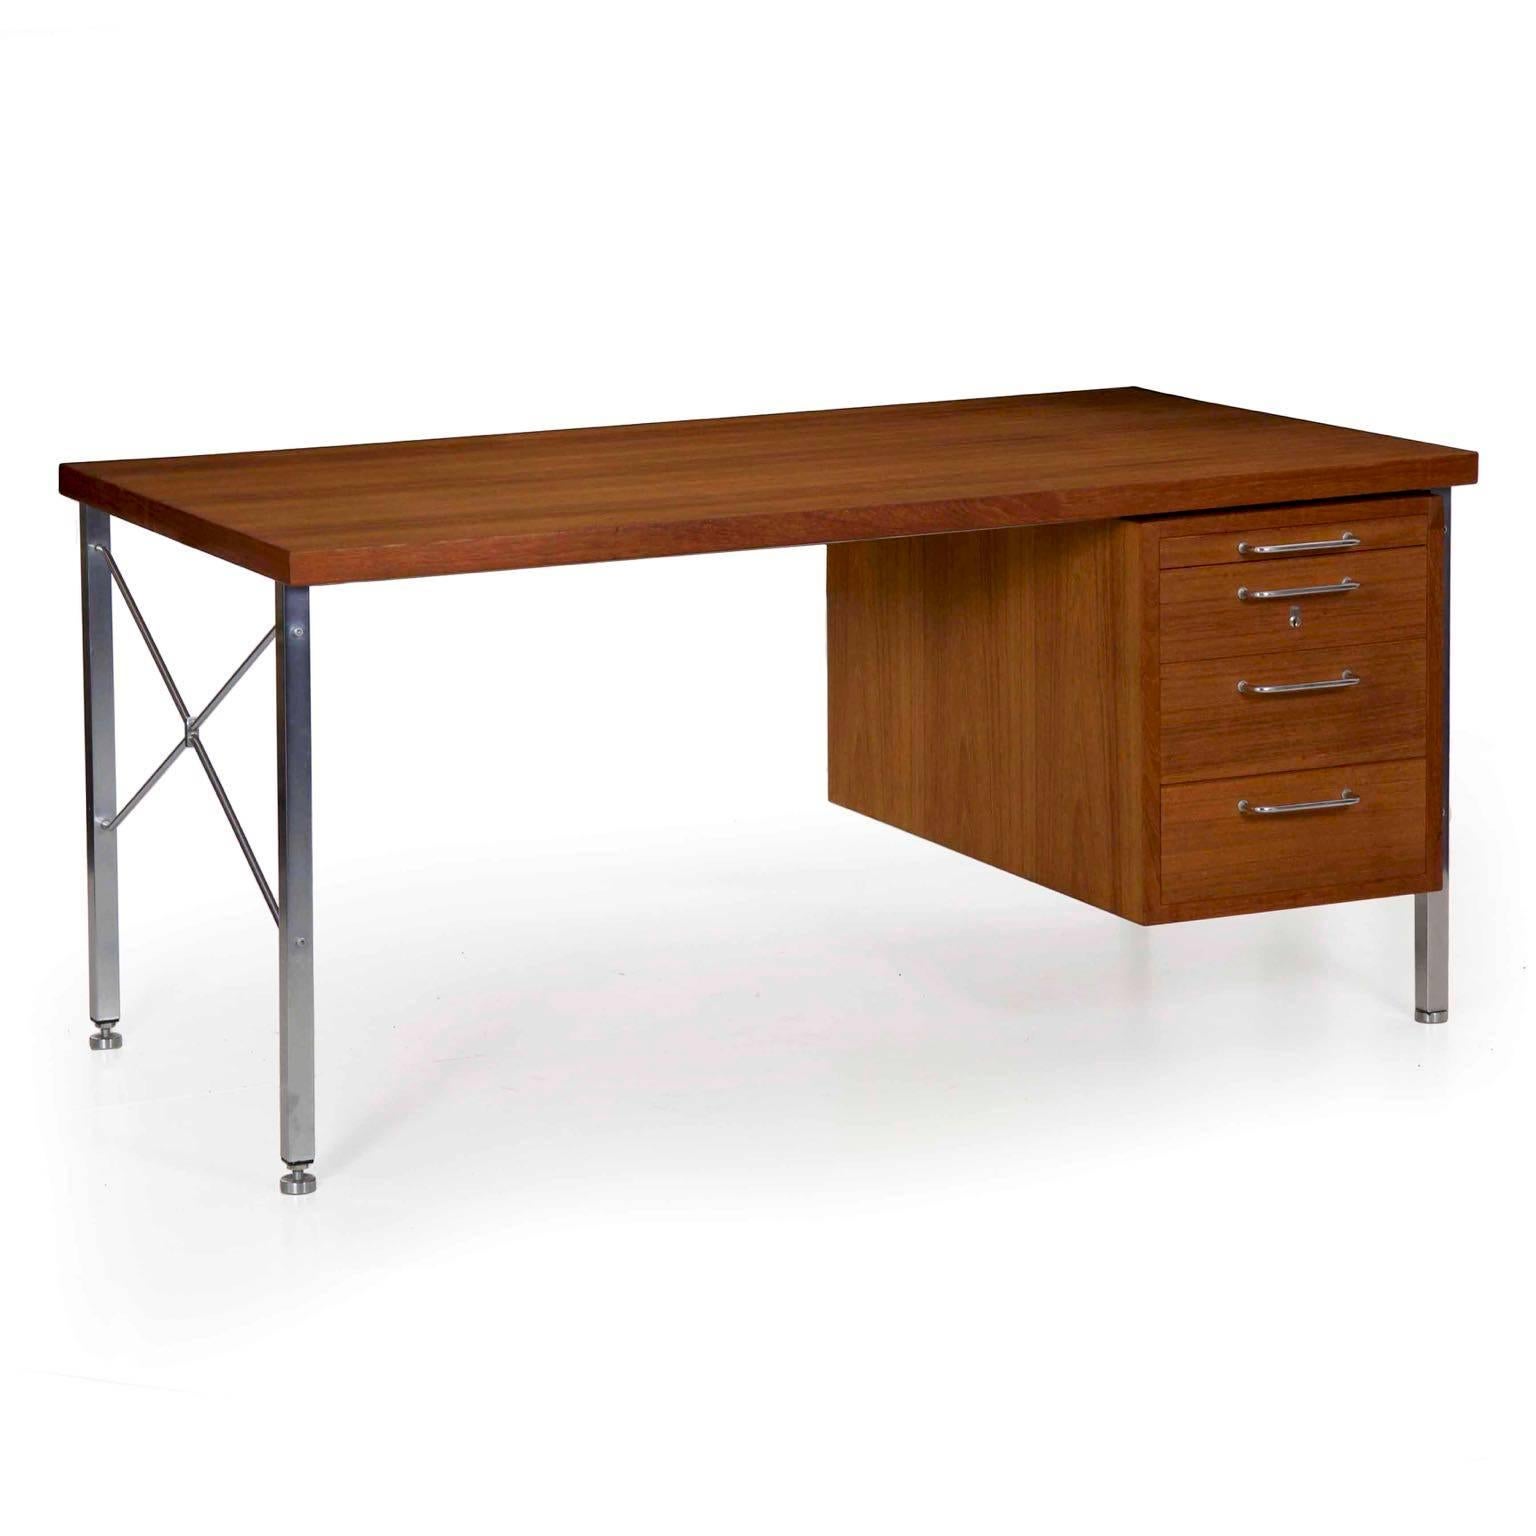 A very precisely built Mid-Century Modern executive desk designed by Hans Wegner and produced in Denmark by Johannes Hansen, this vintage desk is crafted of teak veneers and teak solid over oak, pine and MDF against brushed stainless steel and